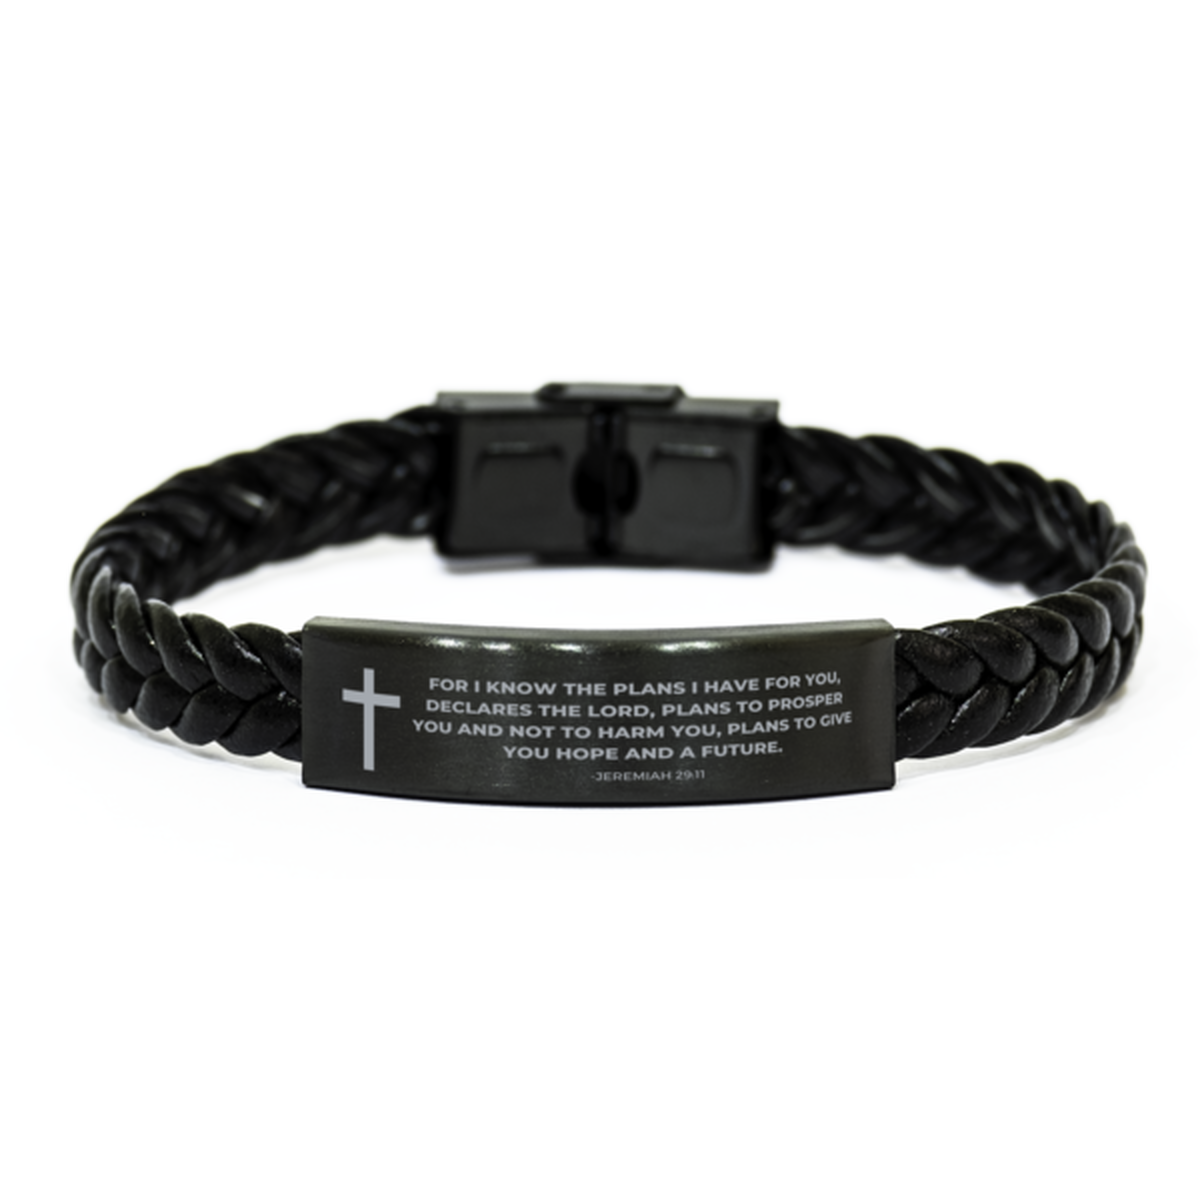 Baptism Gifts For Teenage Boys Girls, Christian Bible Verse Braided Leather Bracelet, For I know the plans, Catholic Confirmation Gifts for Son, Godson, Grandson, Nephew